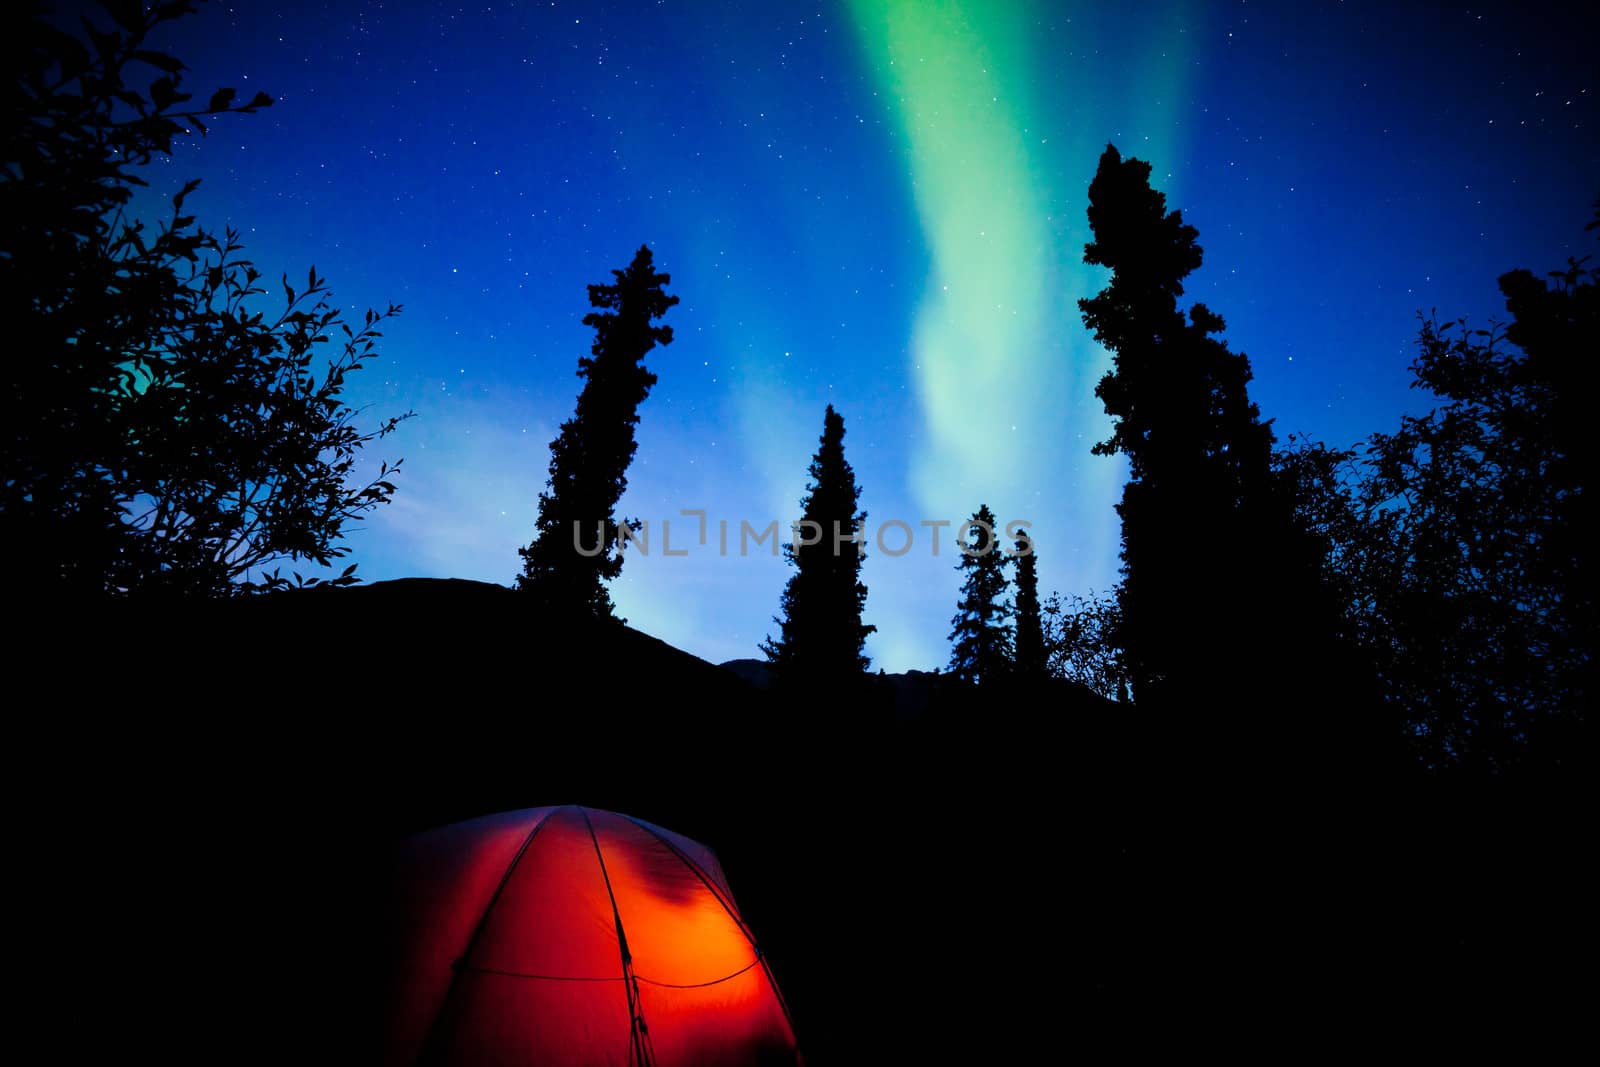 Orange taiga tent glow under northern lights flare by PiLens